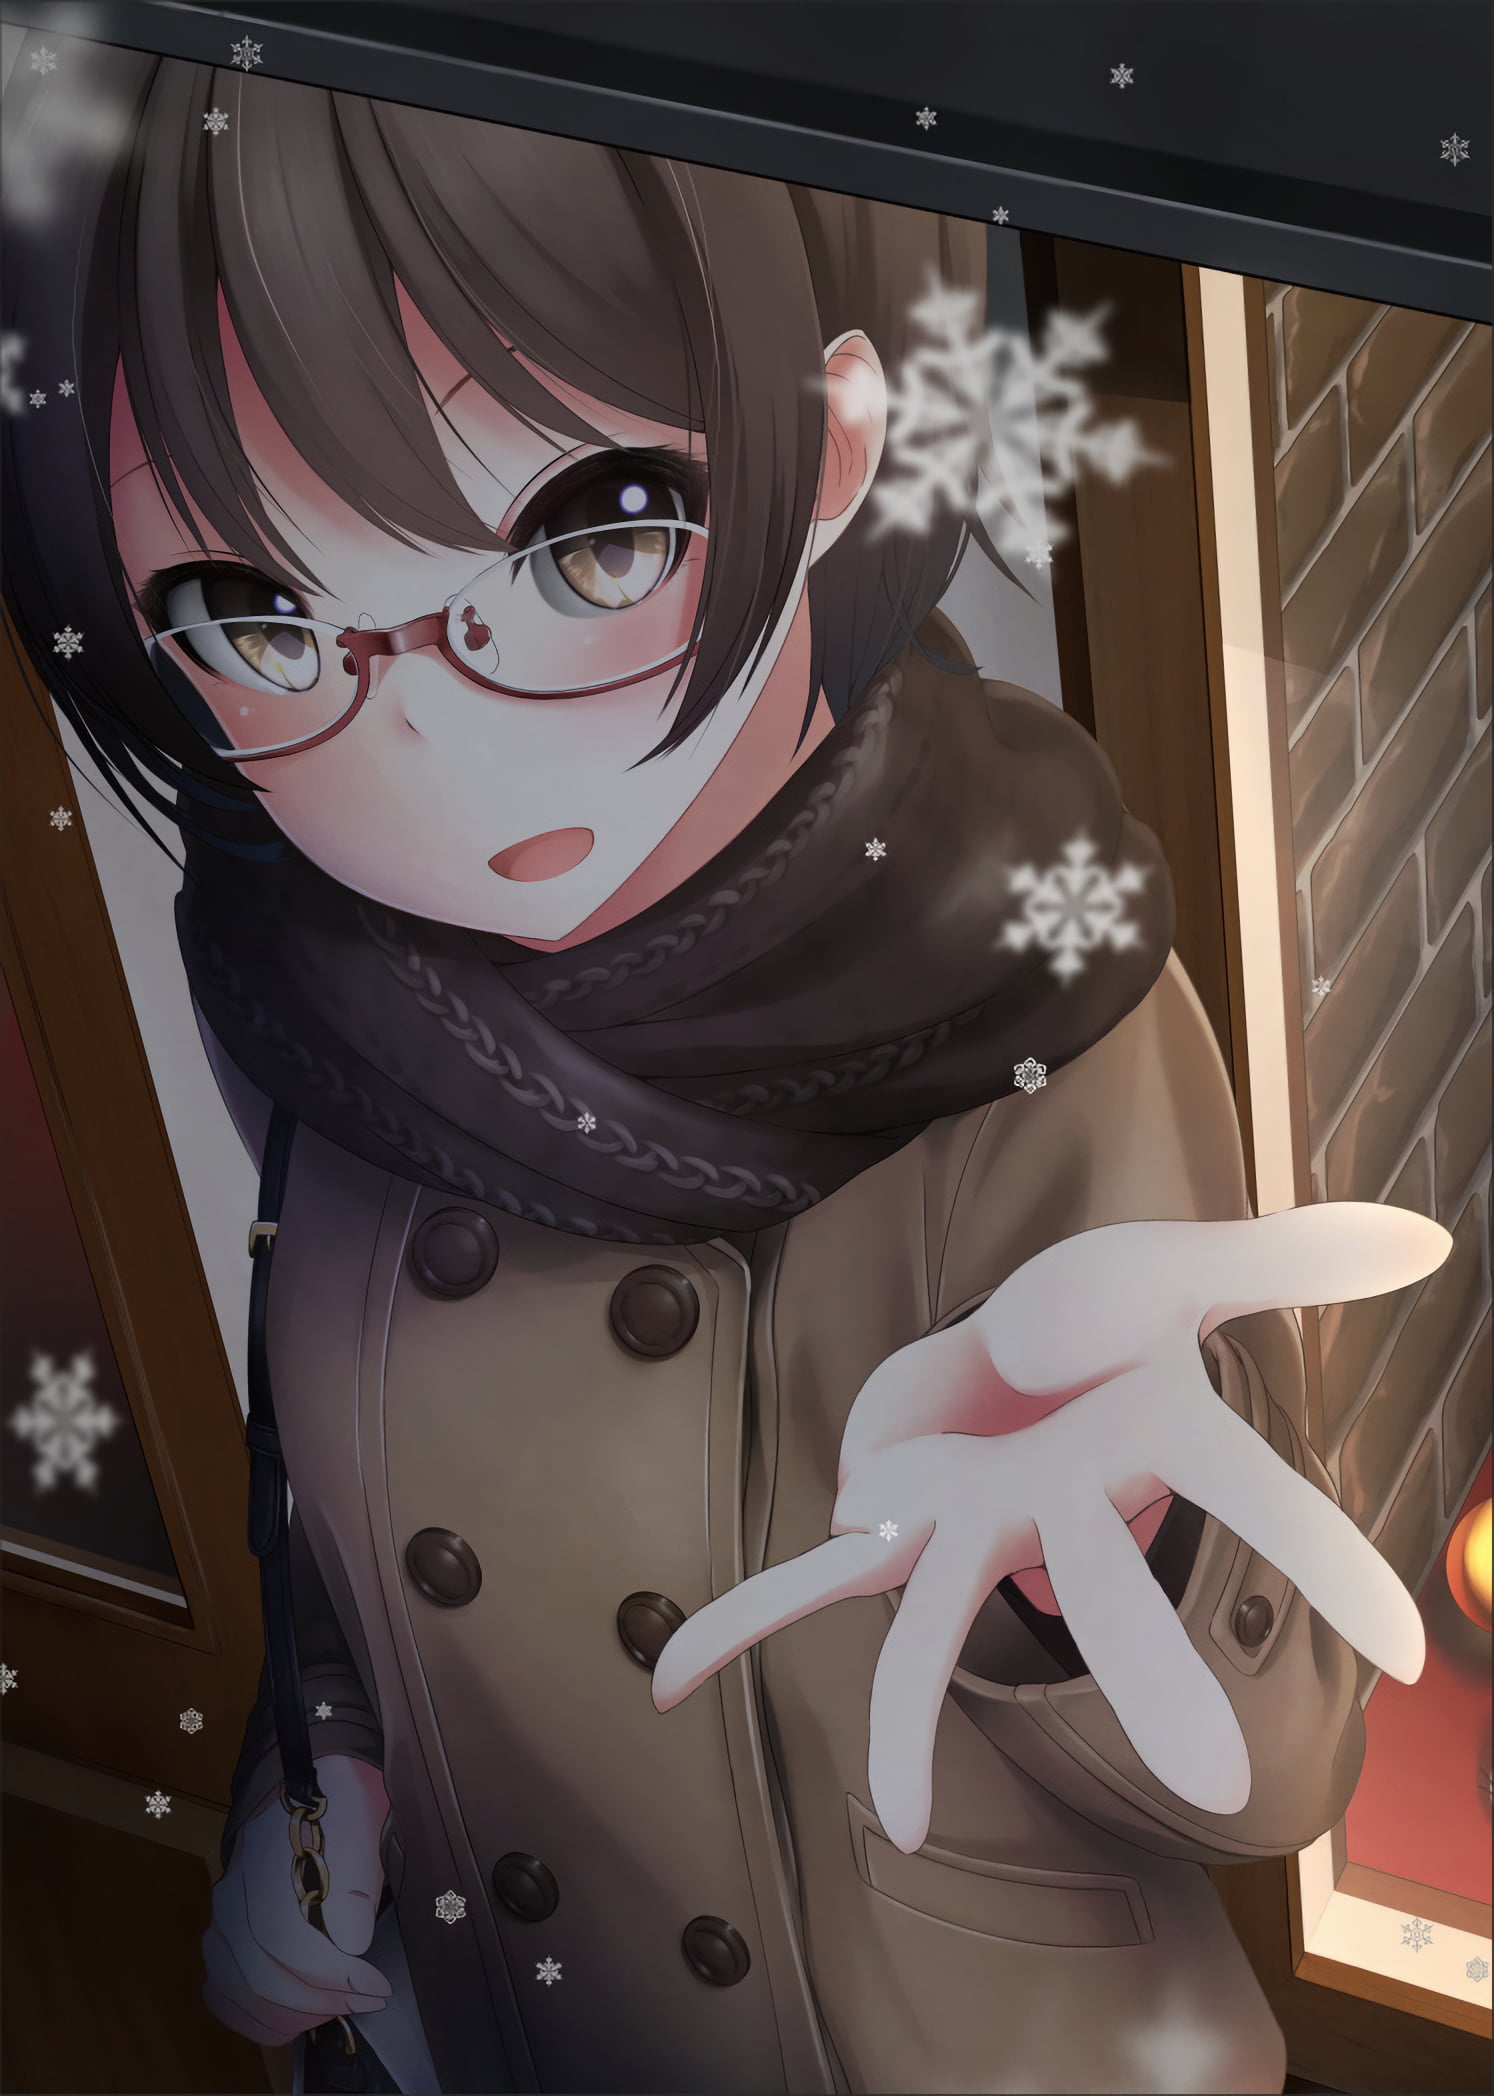 Online crop | black haired female anime character with red eyeglasses